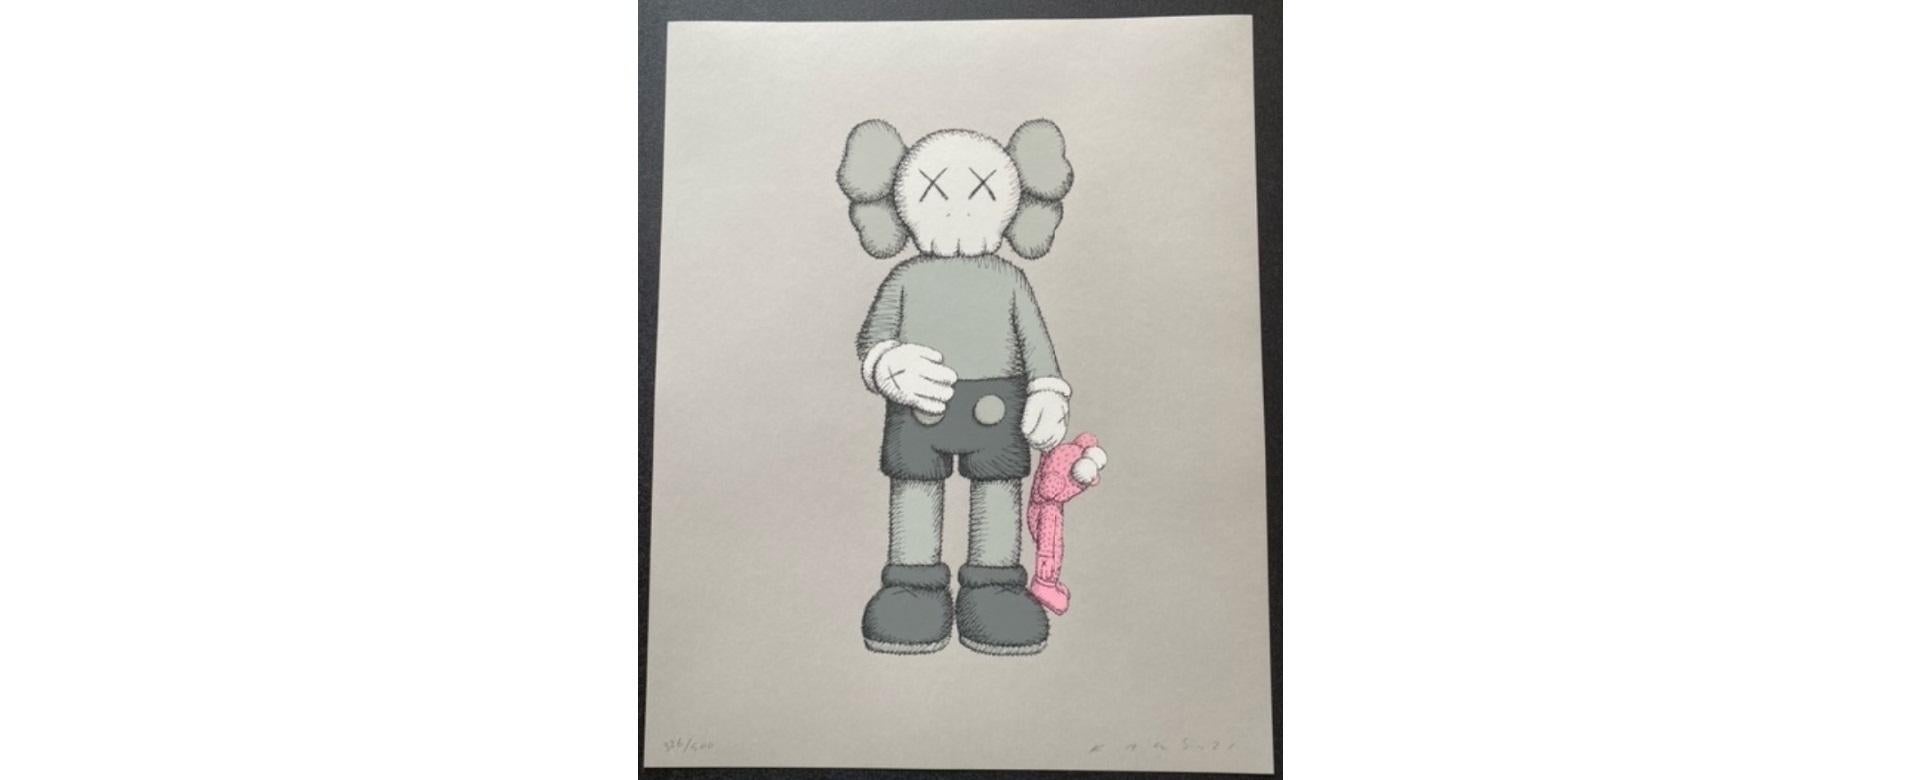 Share, Screenprint on Grey Paper by KAWS, 2021 For Sale 1